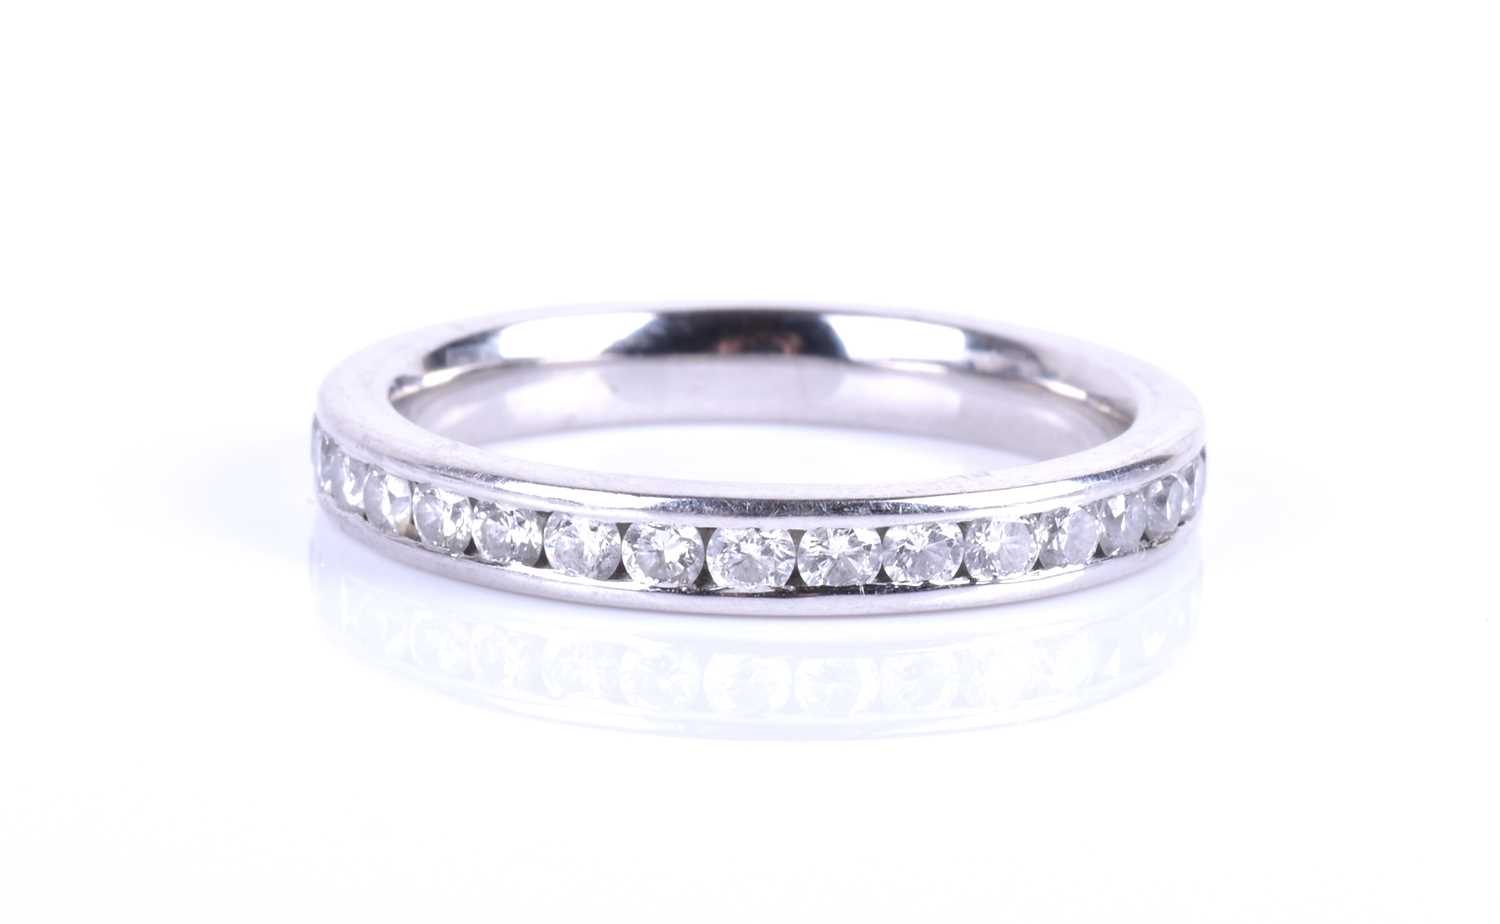 A platinum and diamond eternity ring, channel-set with round brilliant-cut diamonds of approximately